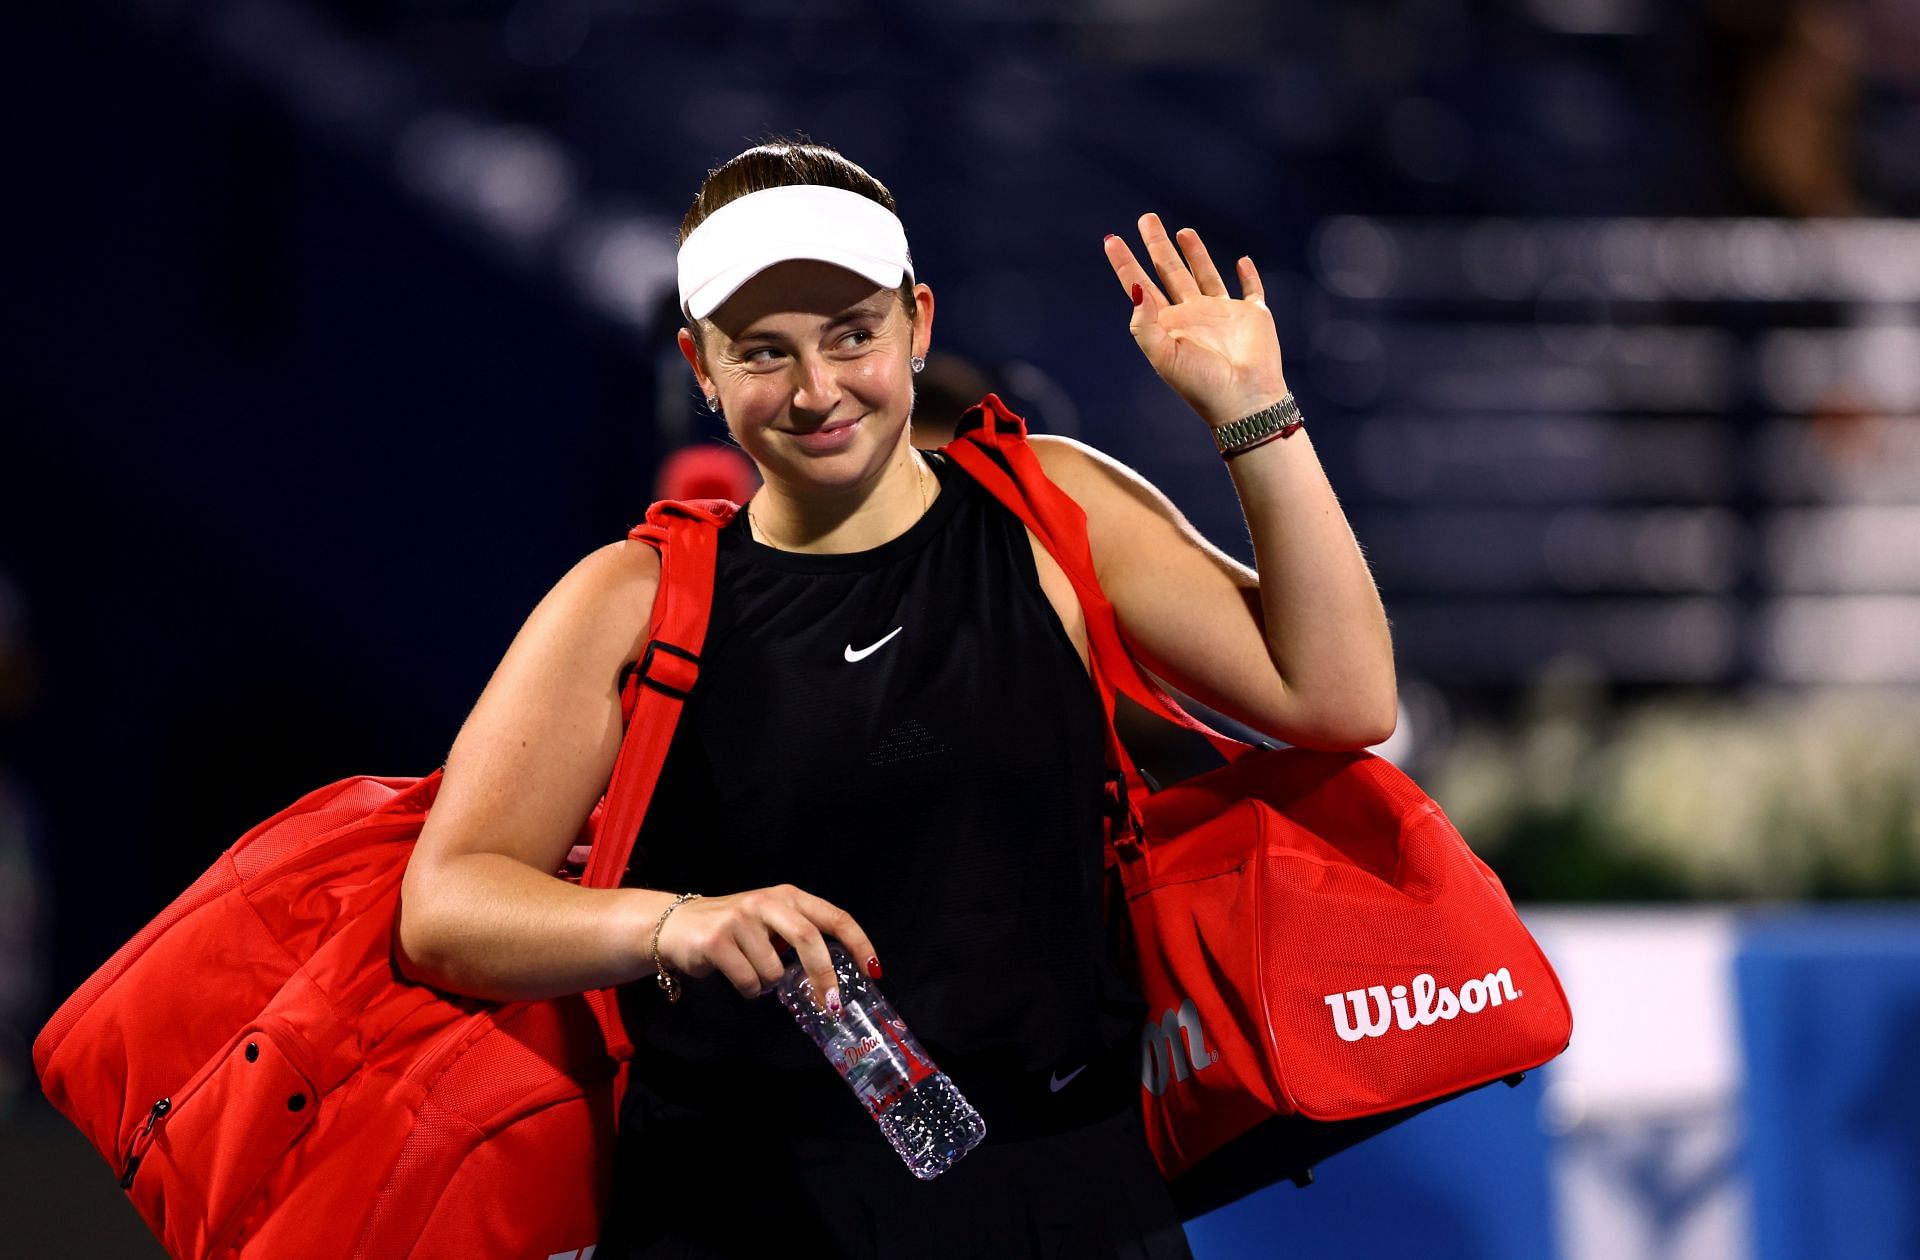 Ostapenko acknowledges the crowd after her semifinal win in Dubai